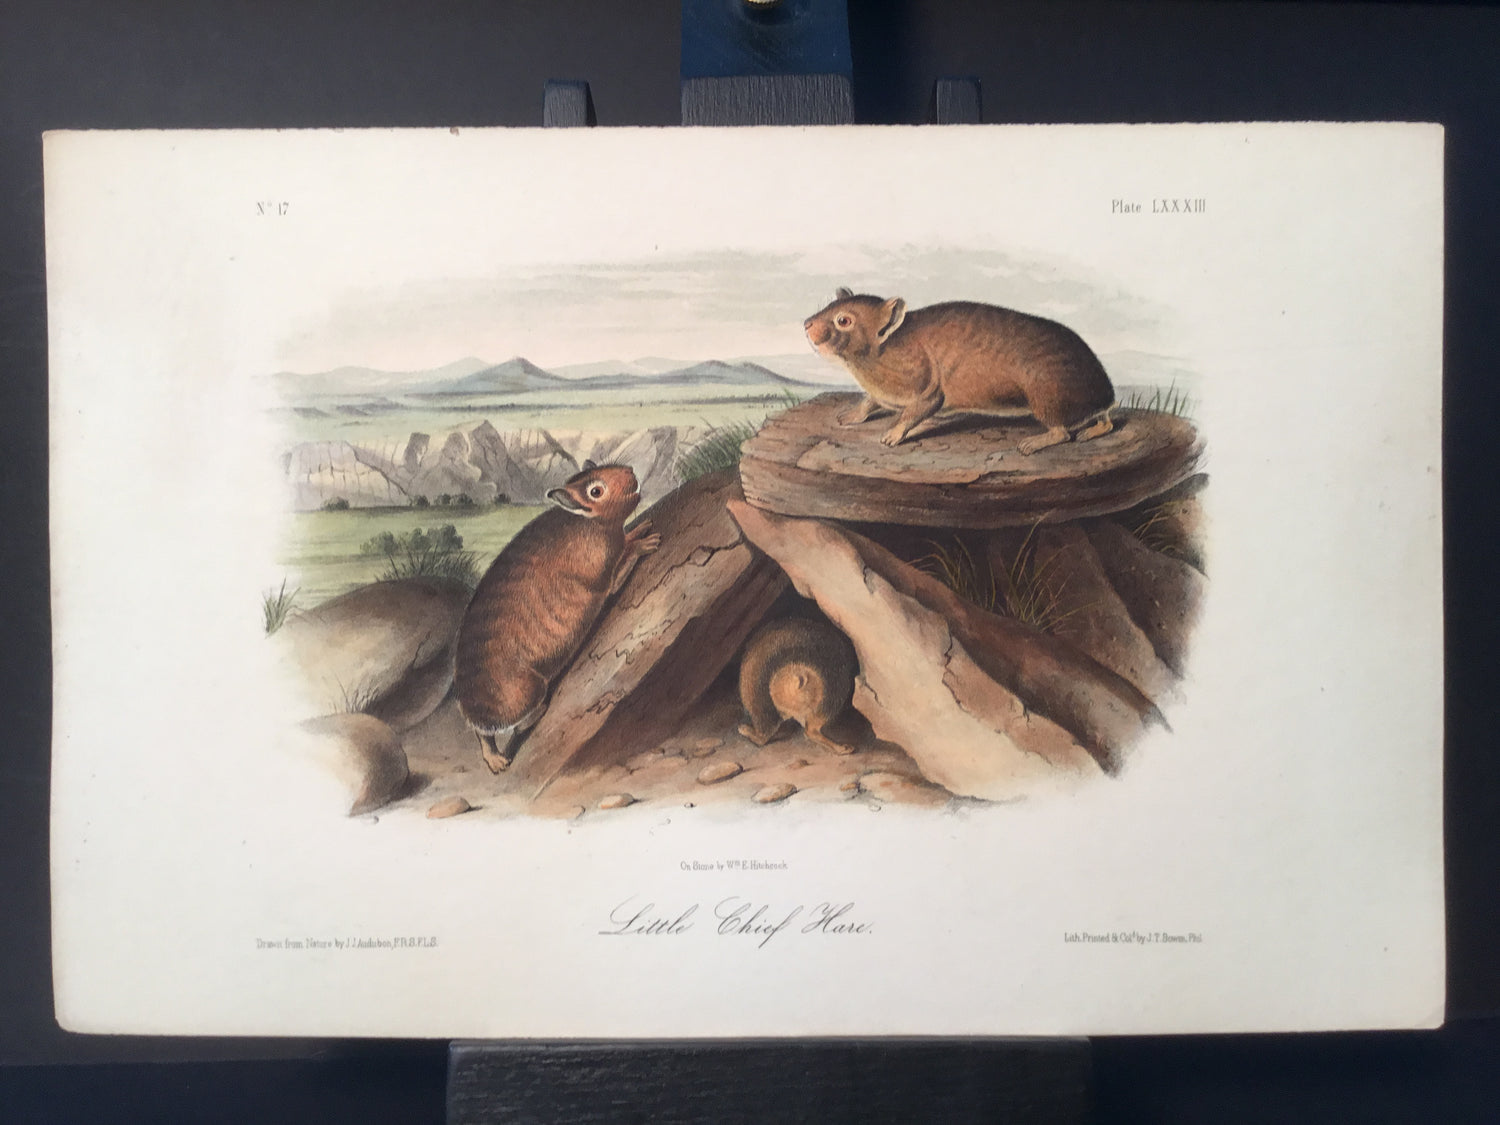 Lord-Hopkins Collection - Little Chief Hare